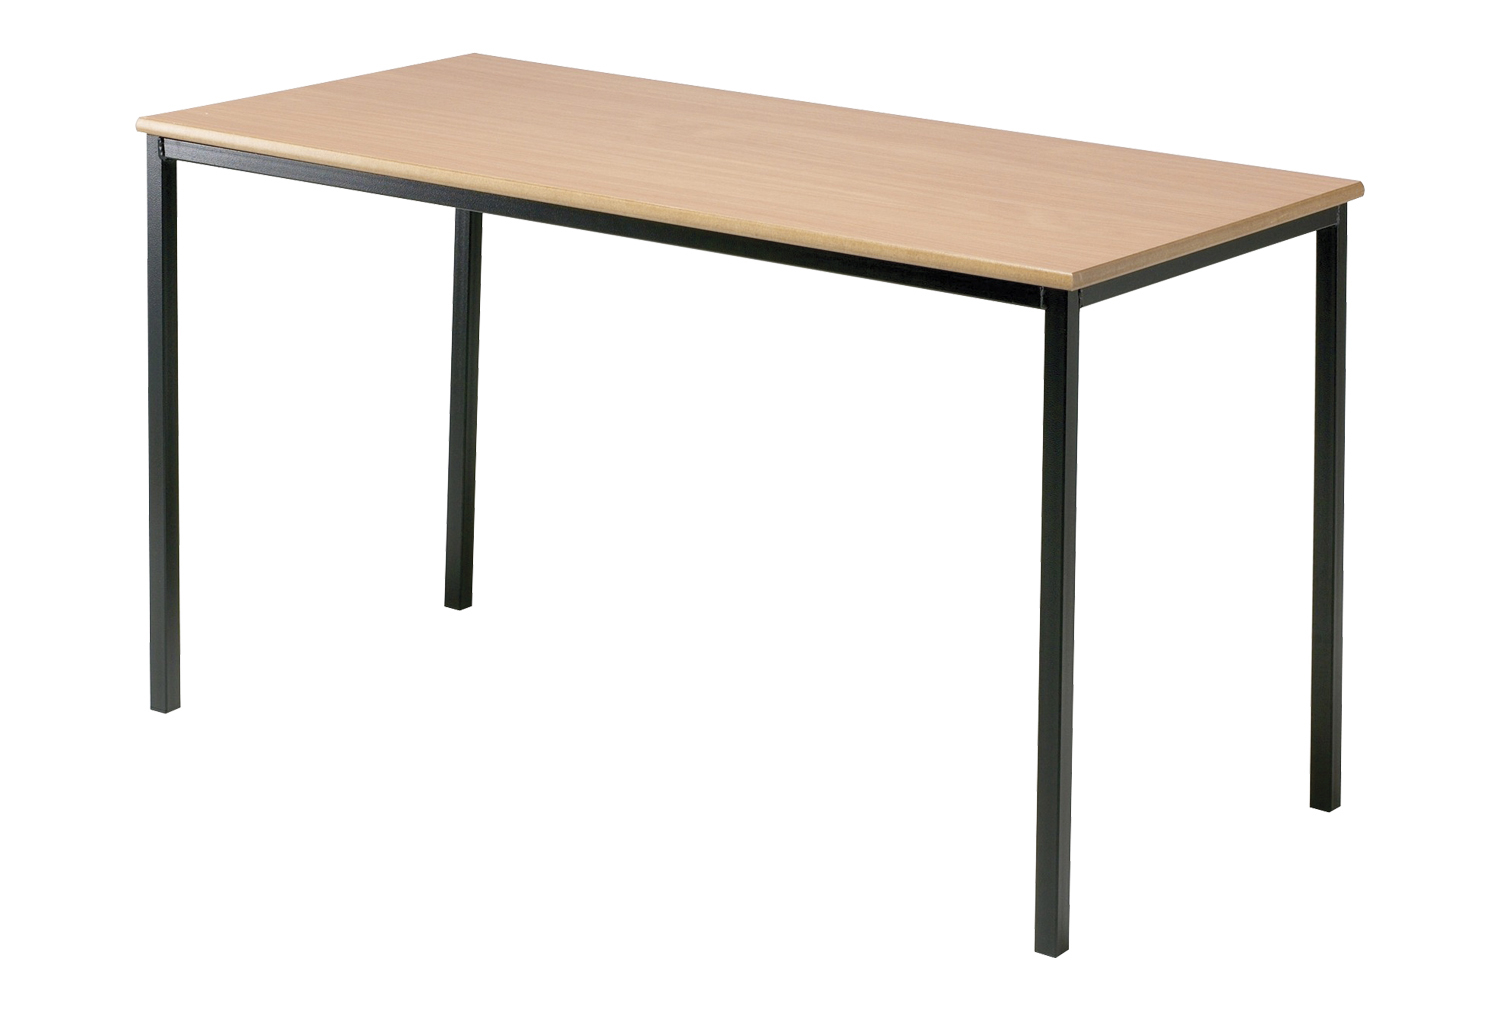 Educate Fully Welded Rectangular Classroom Tables 14+ Years (MDF Edge)